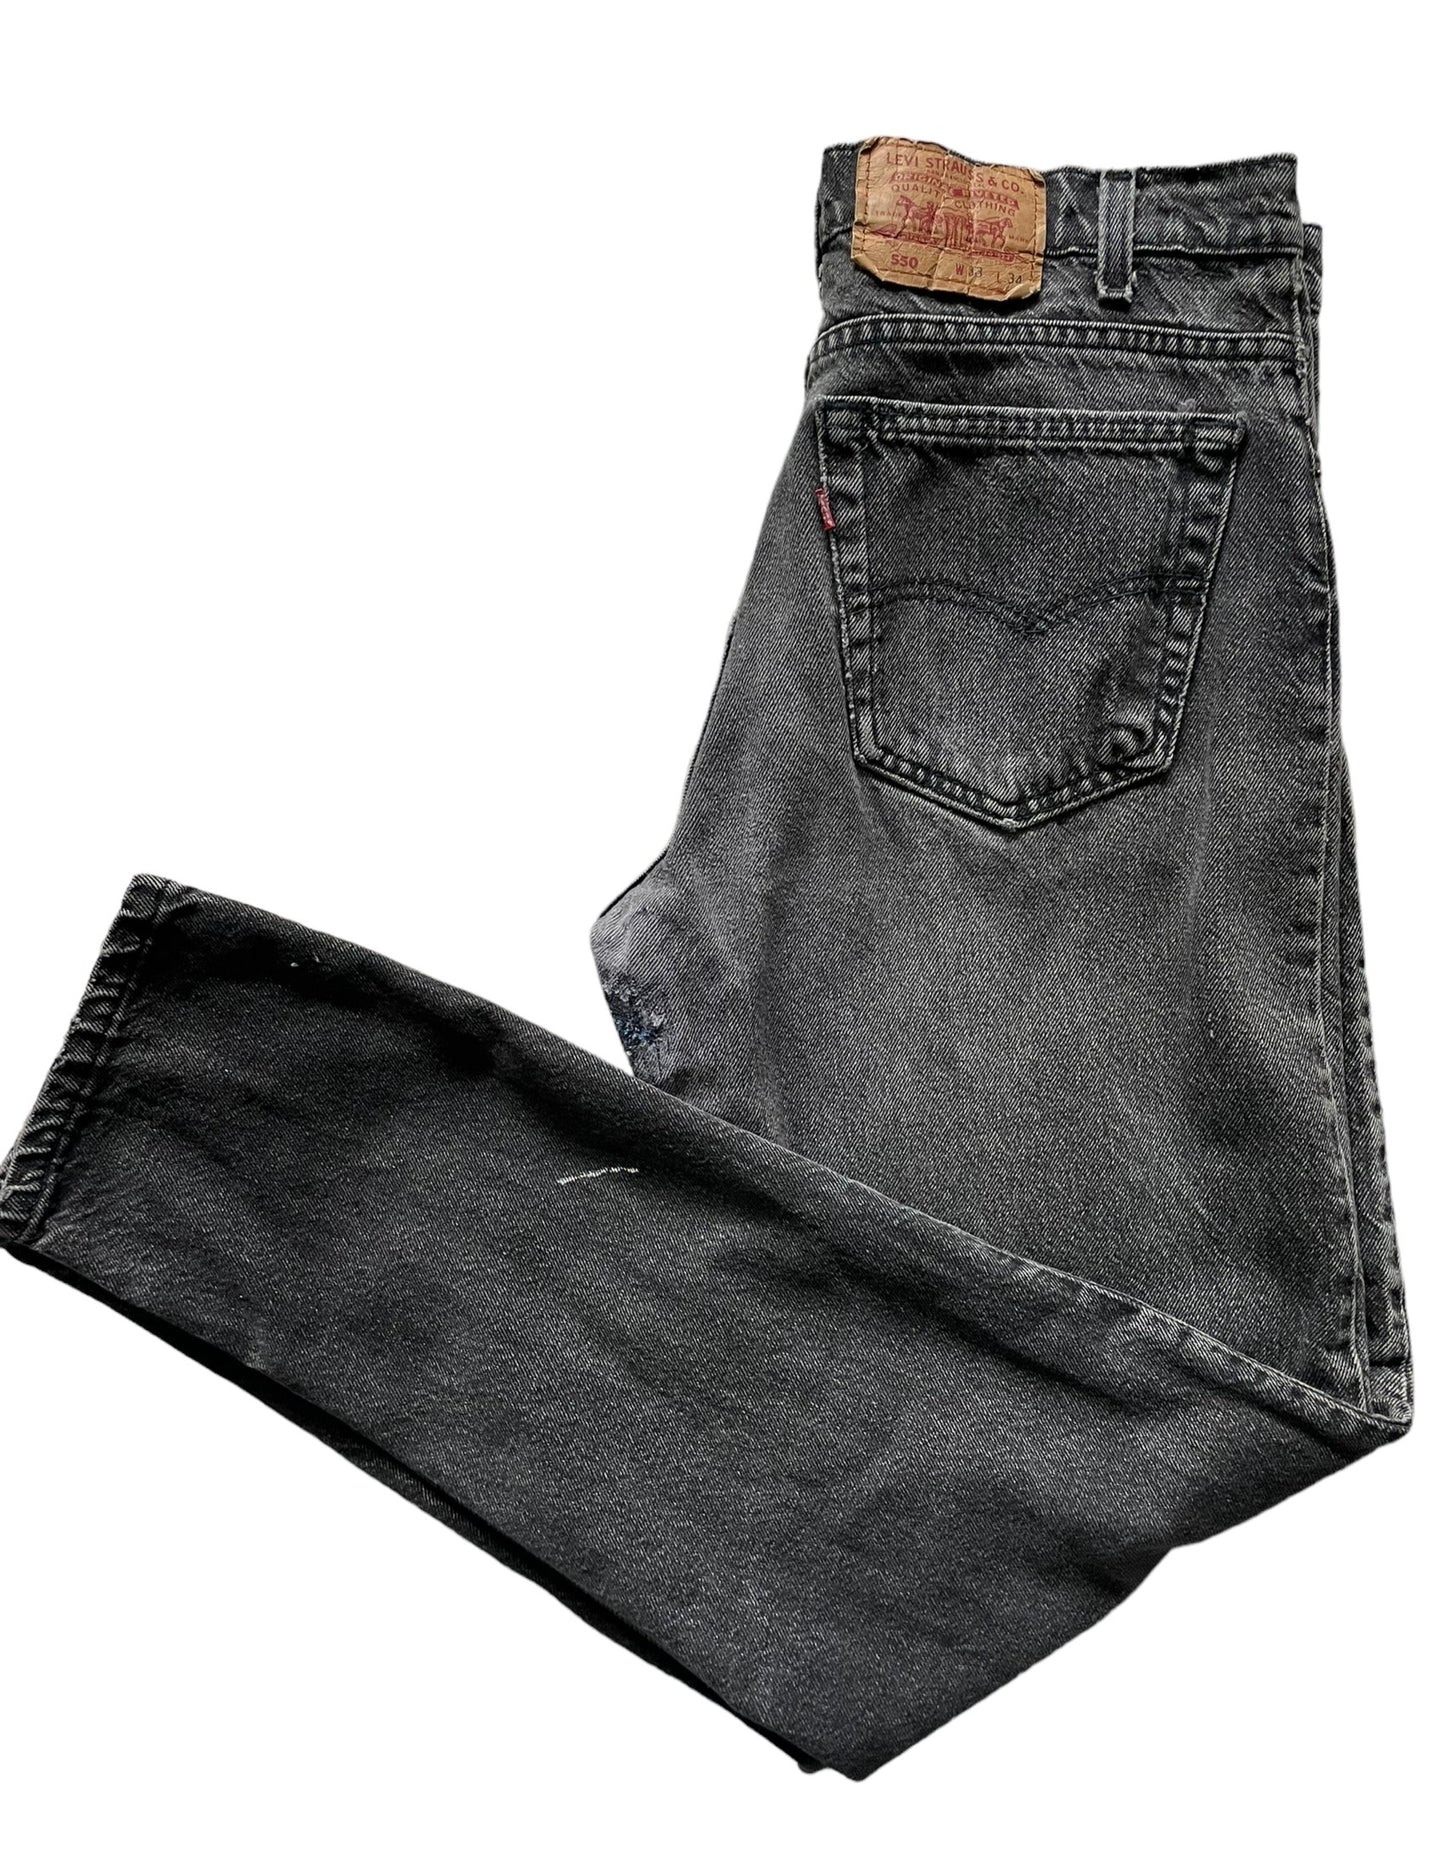 Product view of Vintage USA Mended Black Levi's 550s 33x34 